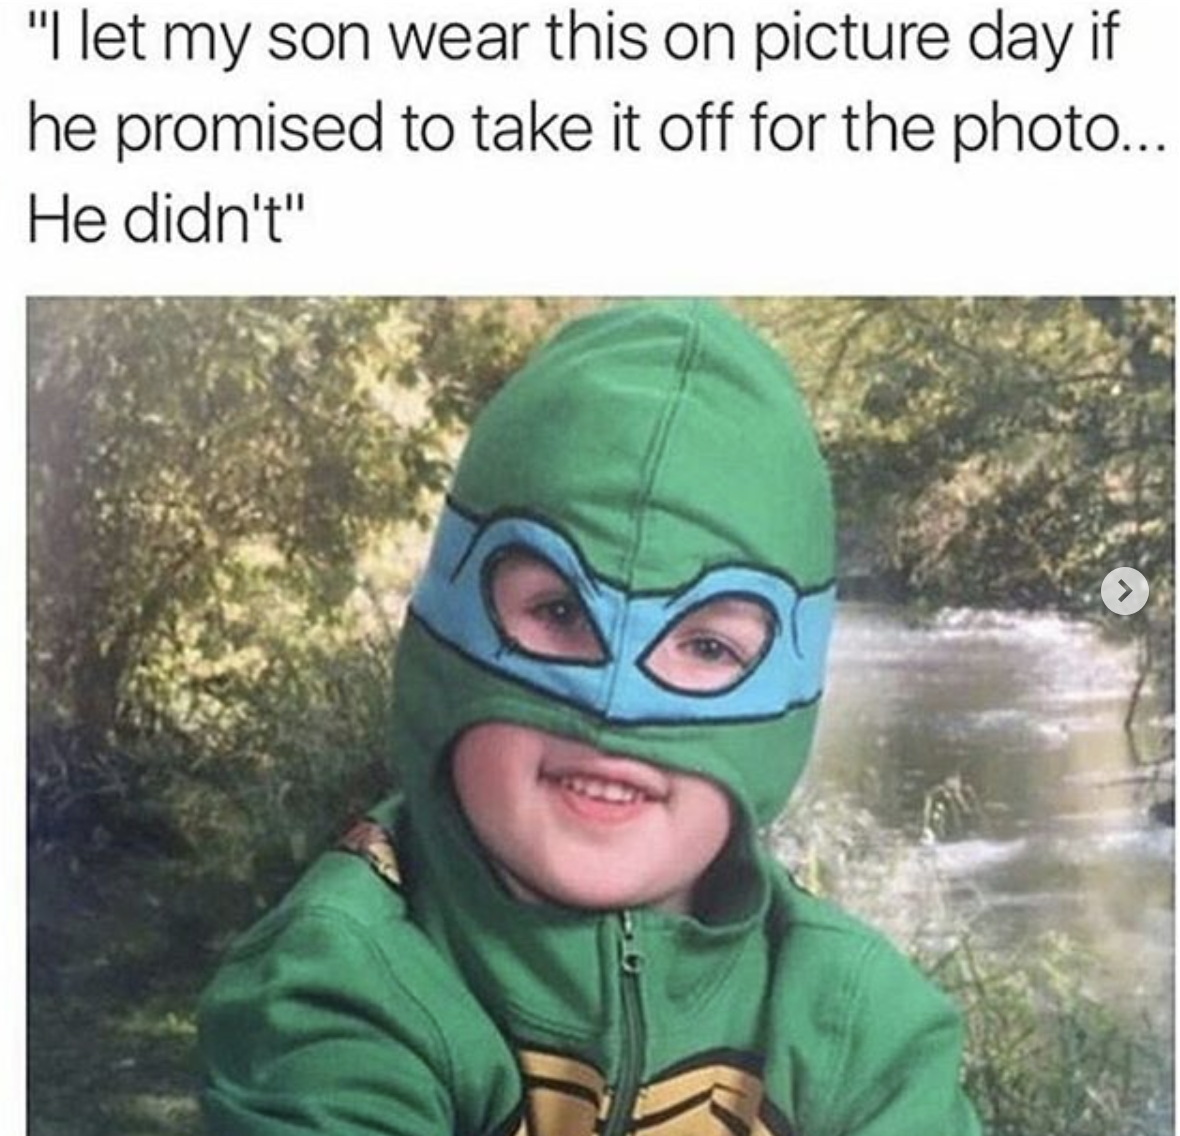 ninja turtle kid - "I let my son wear this on picture day if he promised to take it off for the photo.. He didn't"